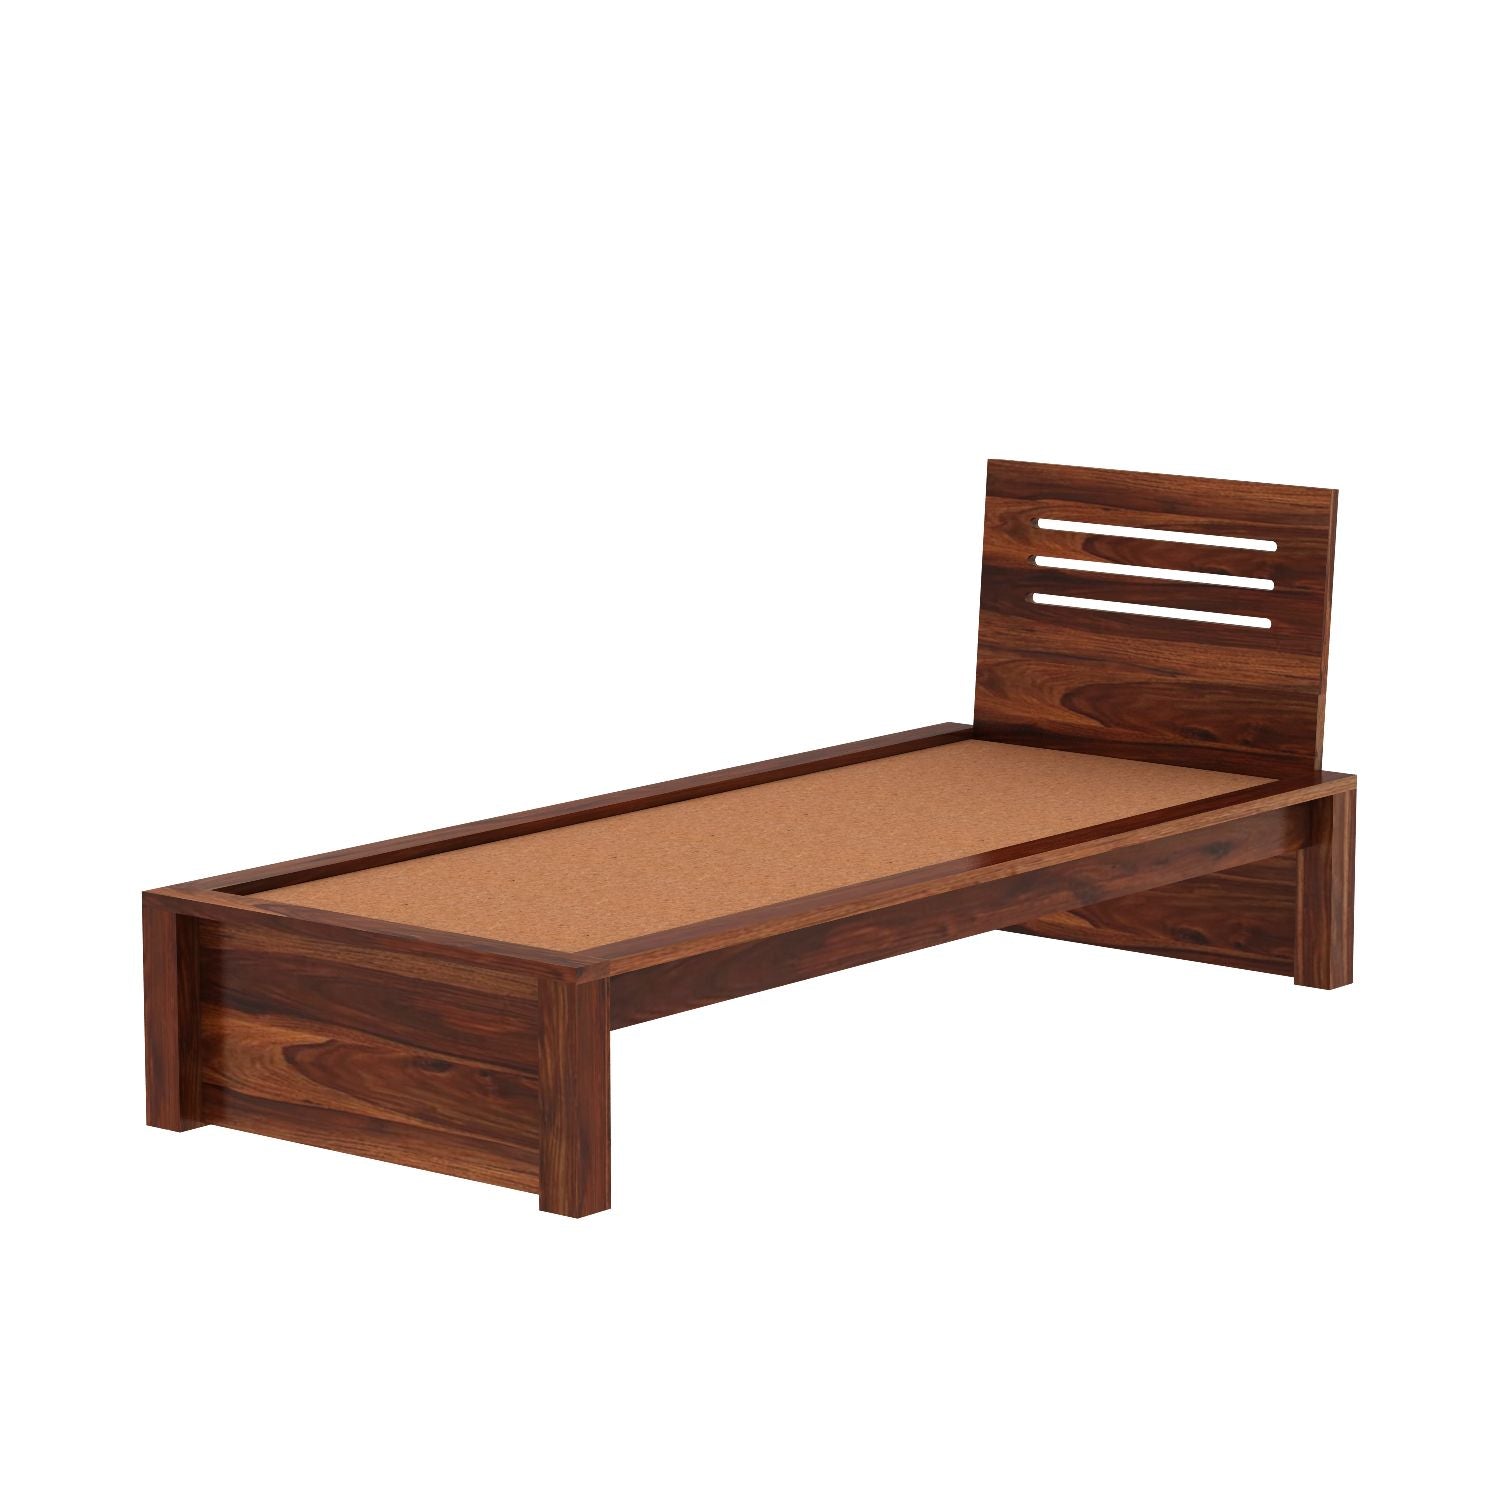 Due Solid Sheesham Wood Single Bed Without Storage (Natural Finish)